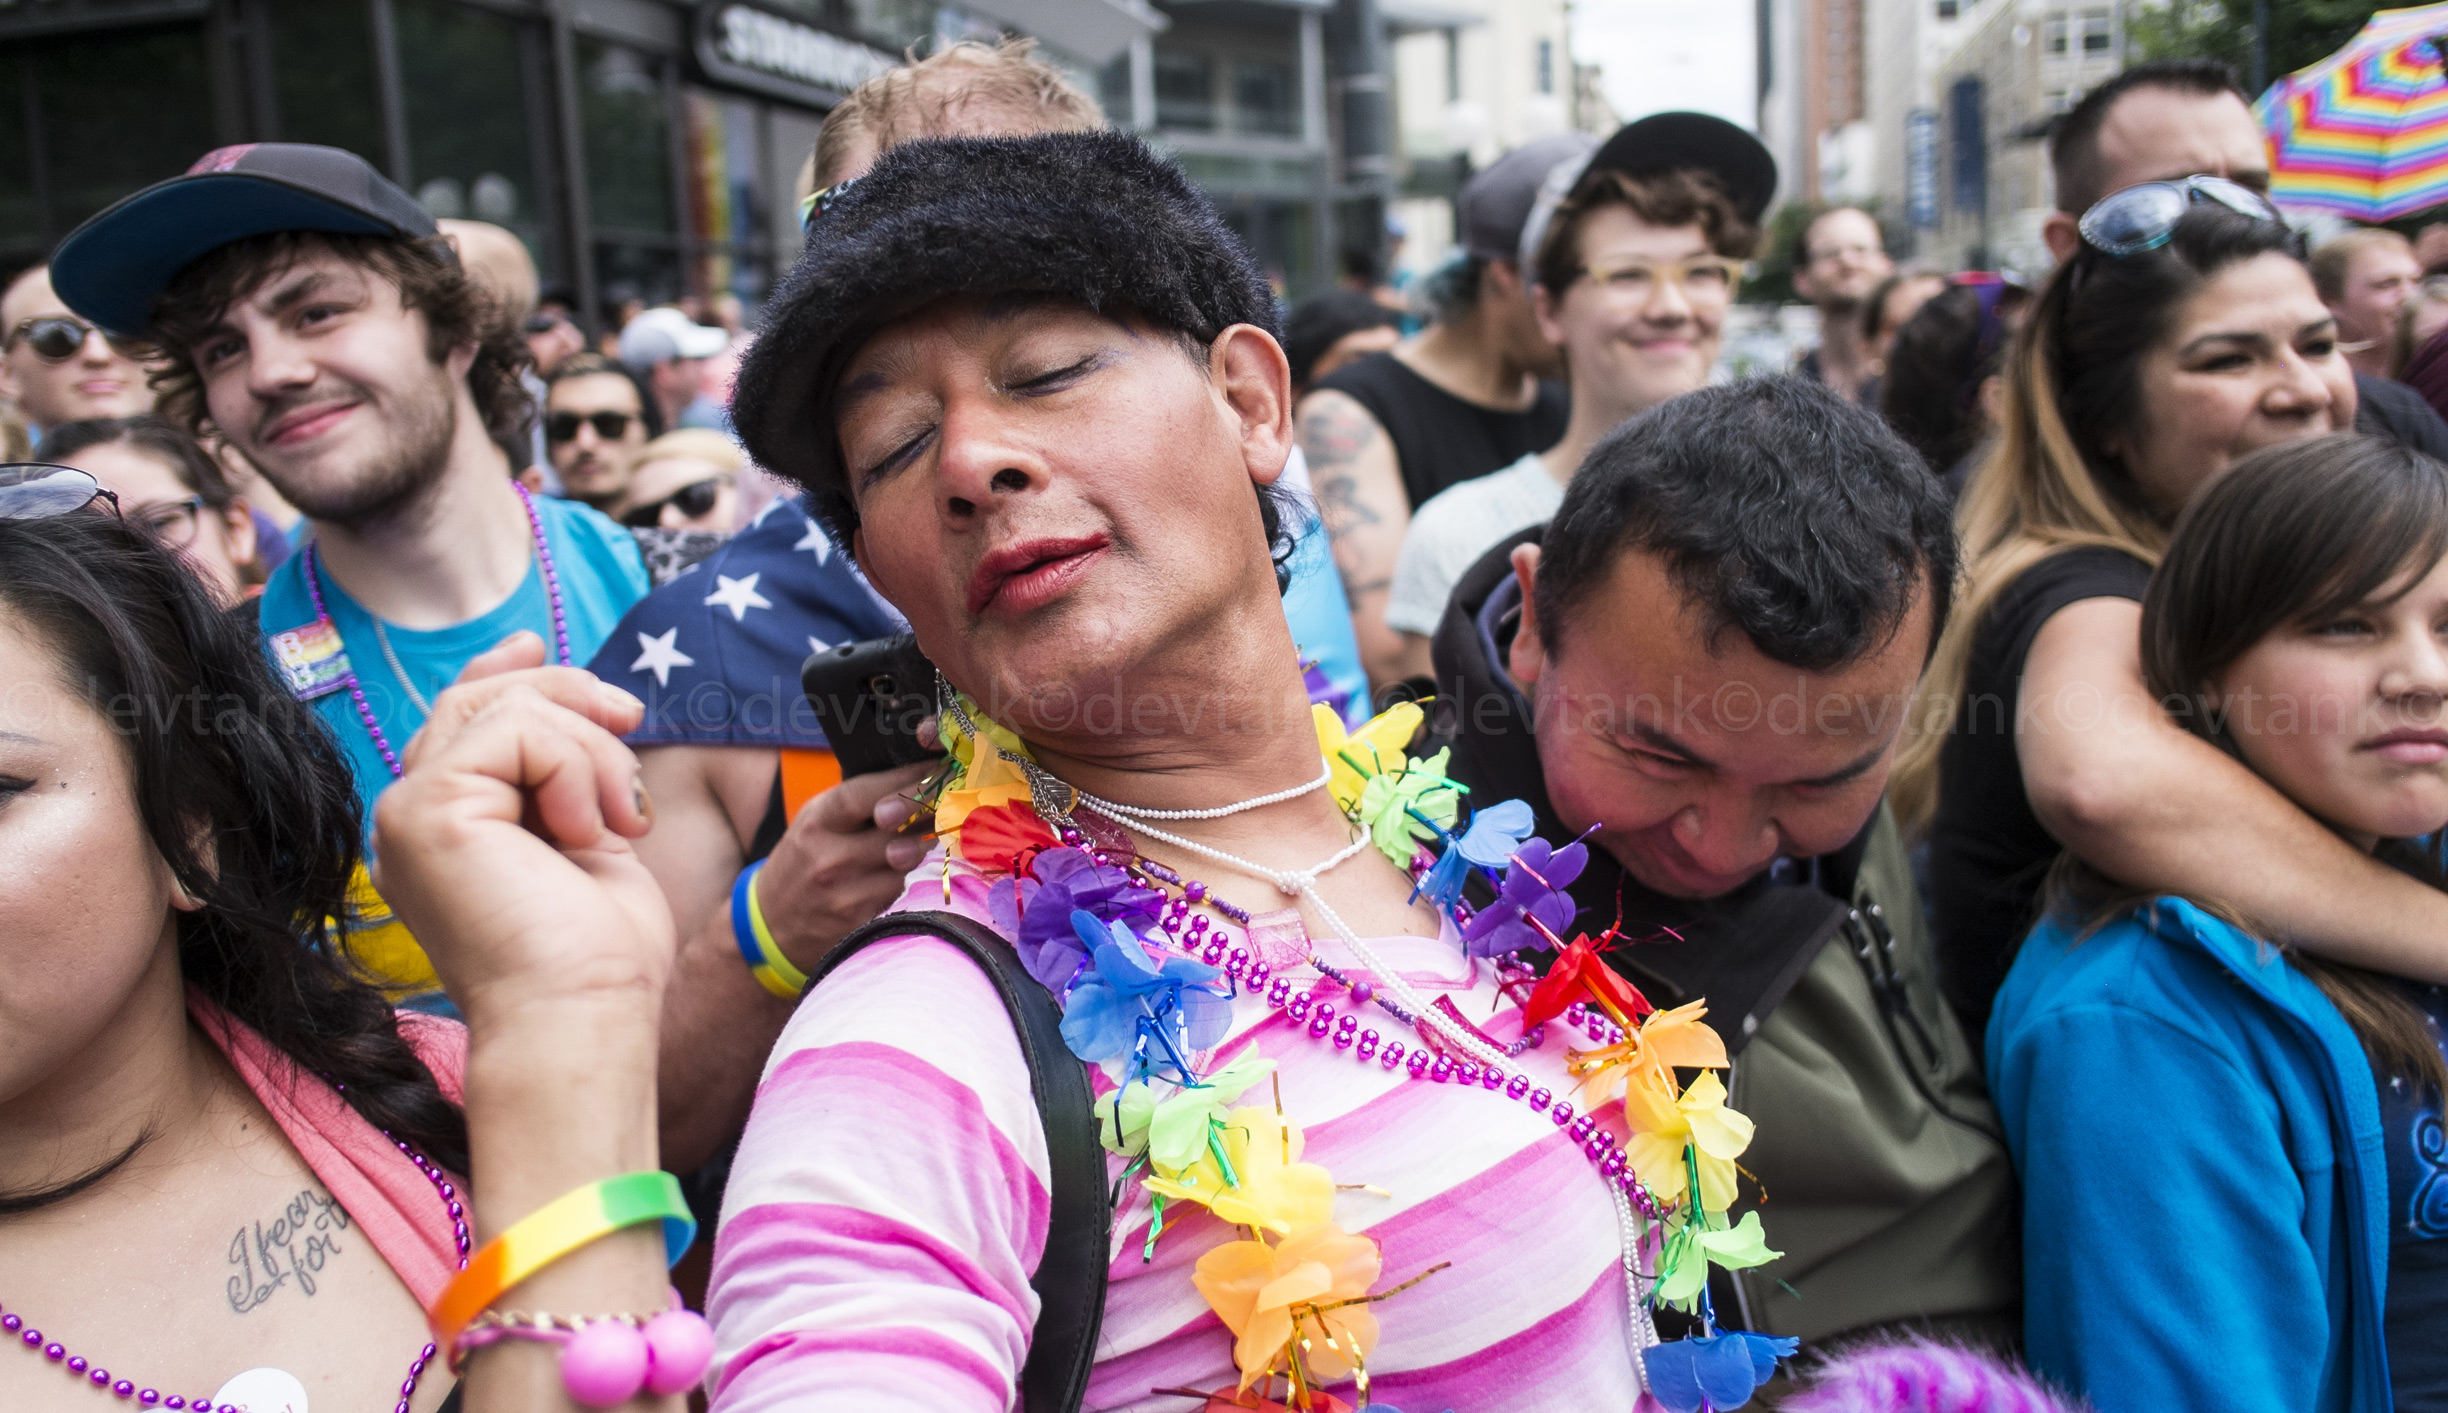 2014 Seattle Pride Festival has grown exponentially over the last decade. It now regularly attracts crowds in excess of four hundred thousand people. 